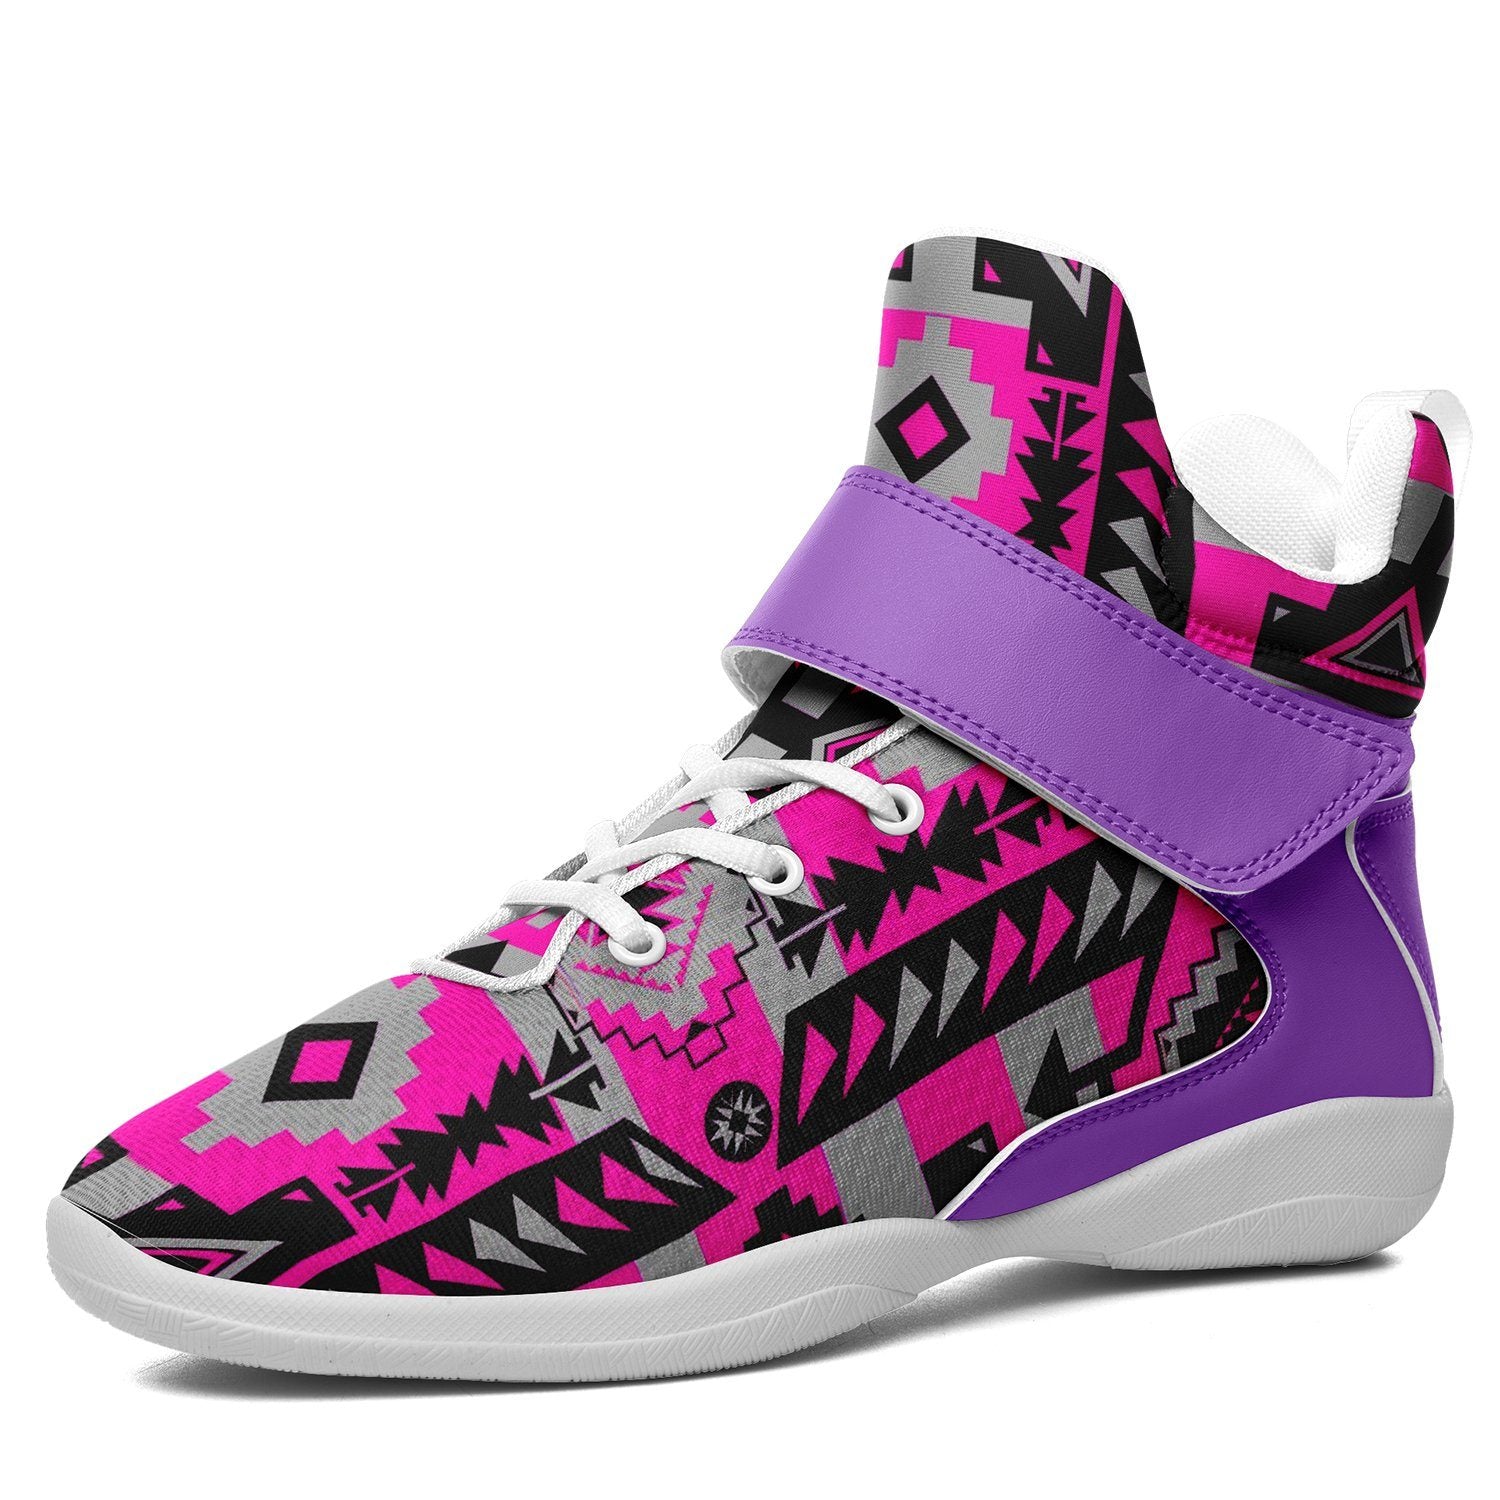 Chiefs Mountain Sunset Ipottaa Basketball / Sport High Top Shoes 49 Dzine US Child 12.5 / EUR 30 White Sole with Lavender Strap 